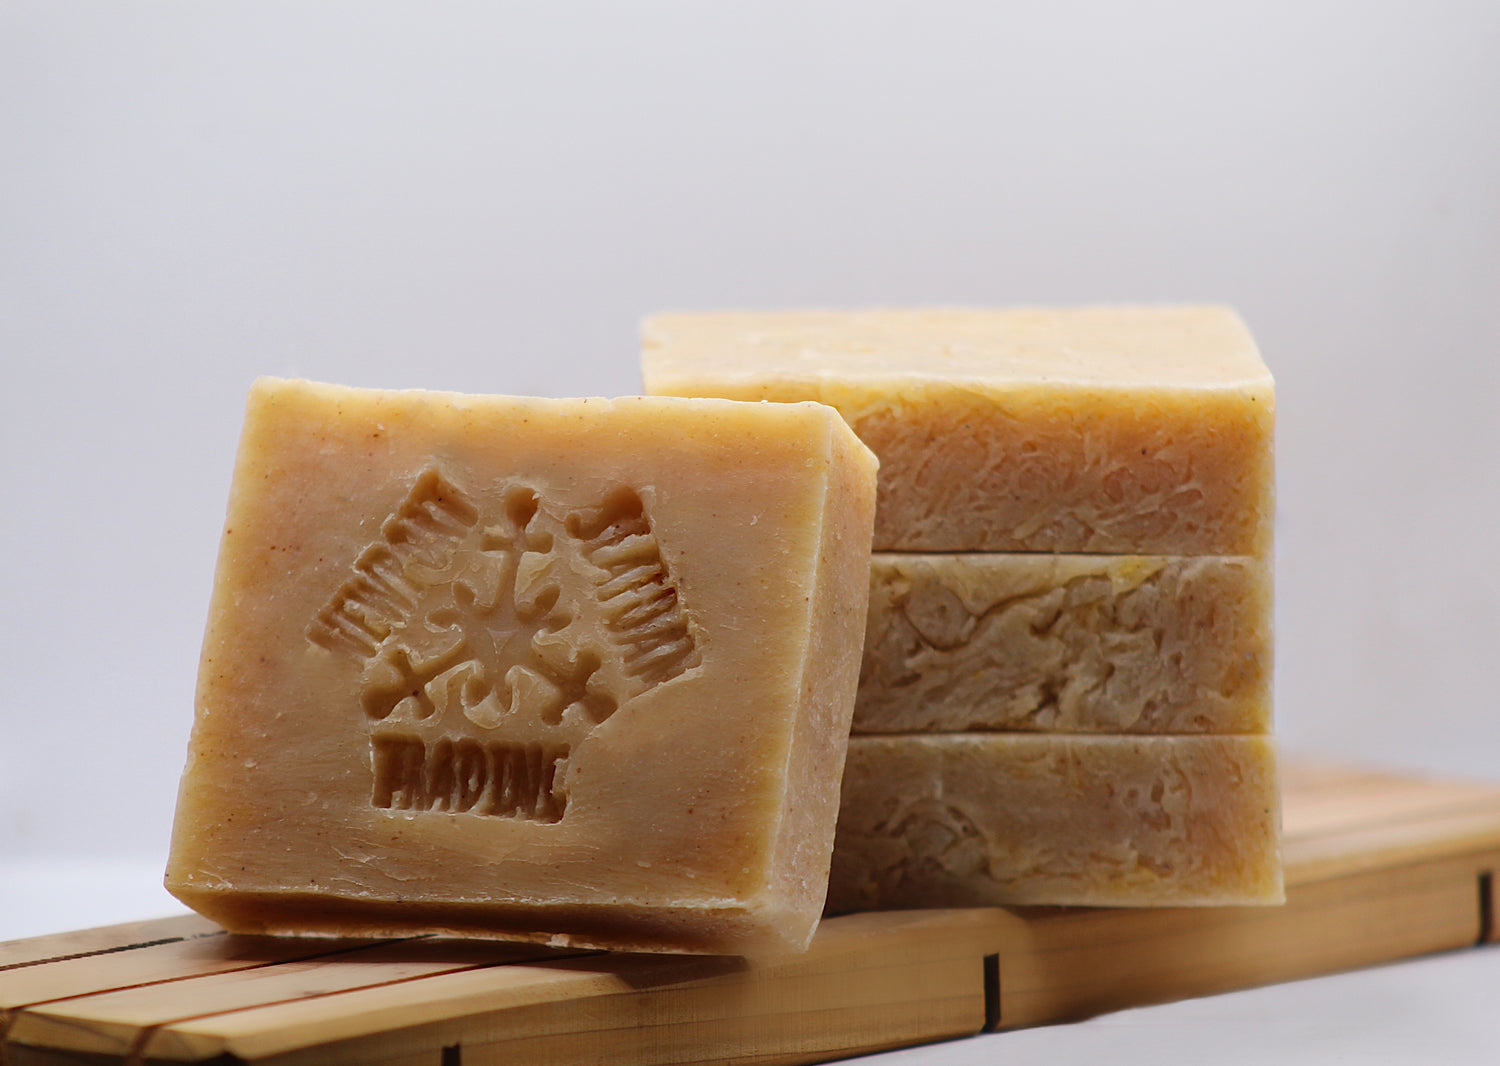 A Brief History of Soap and Soap Making